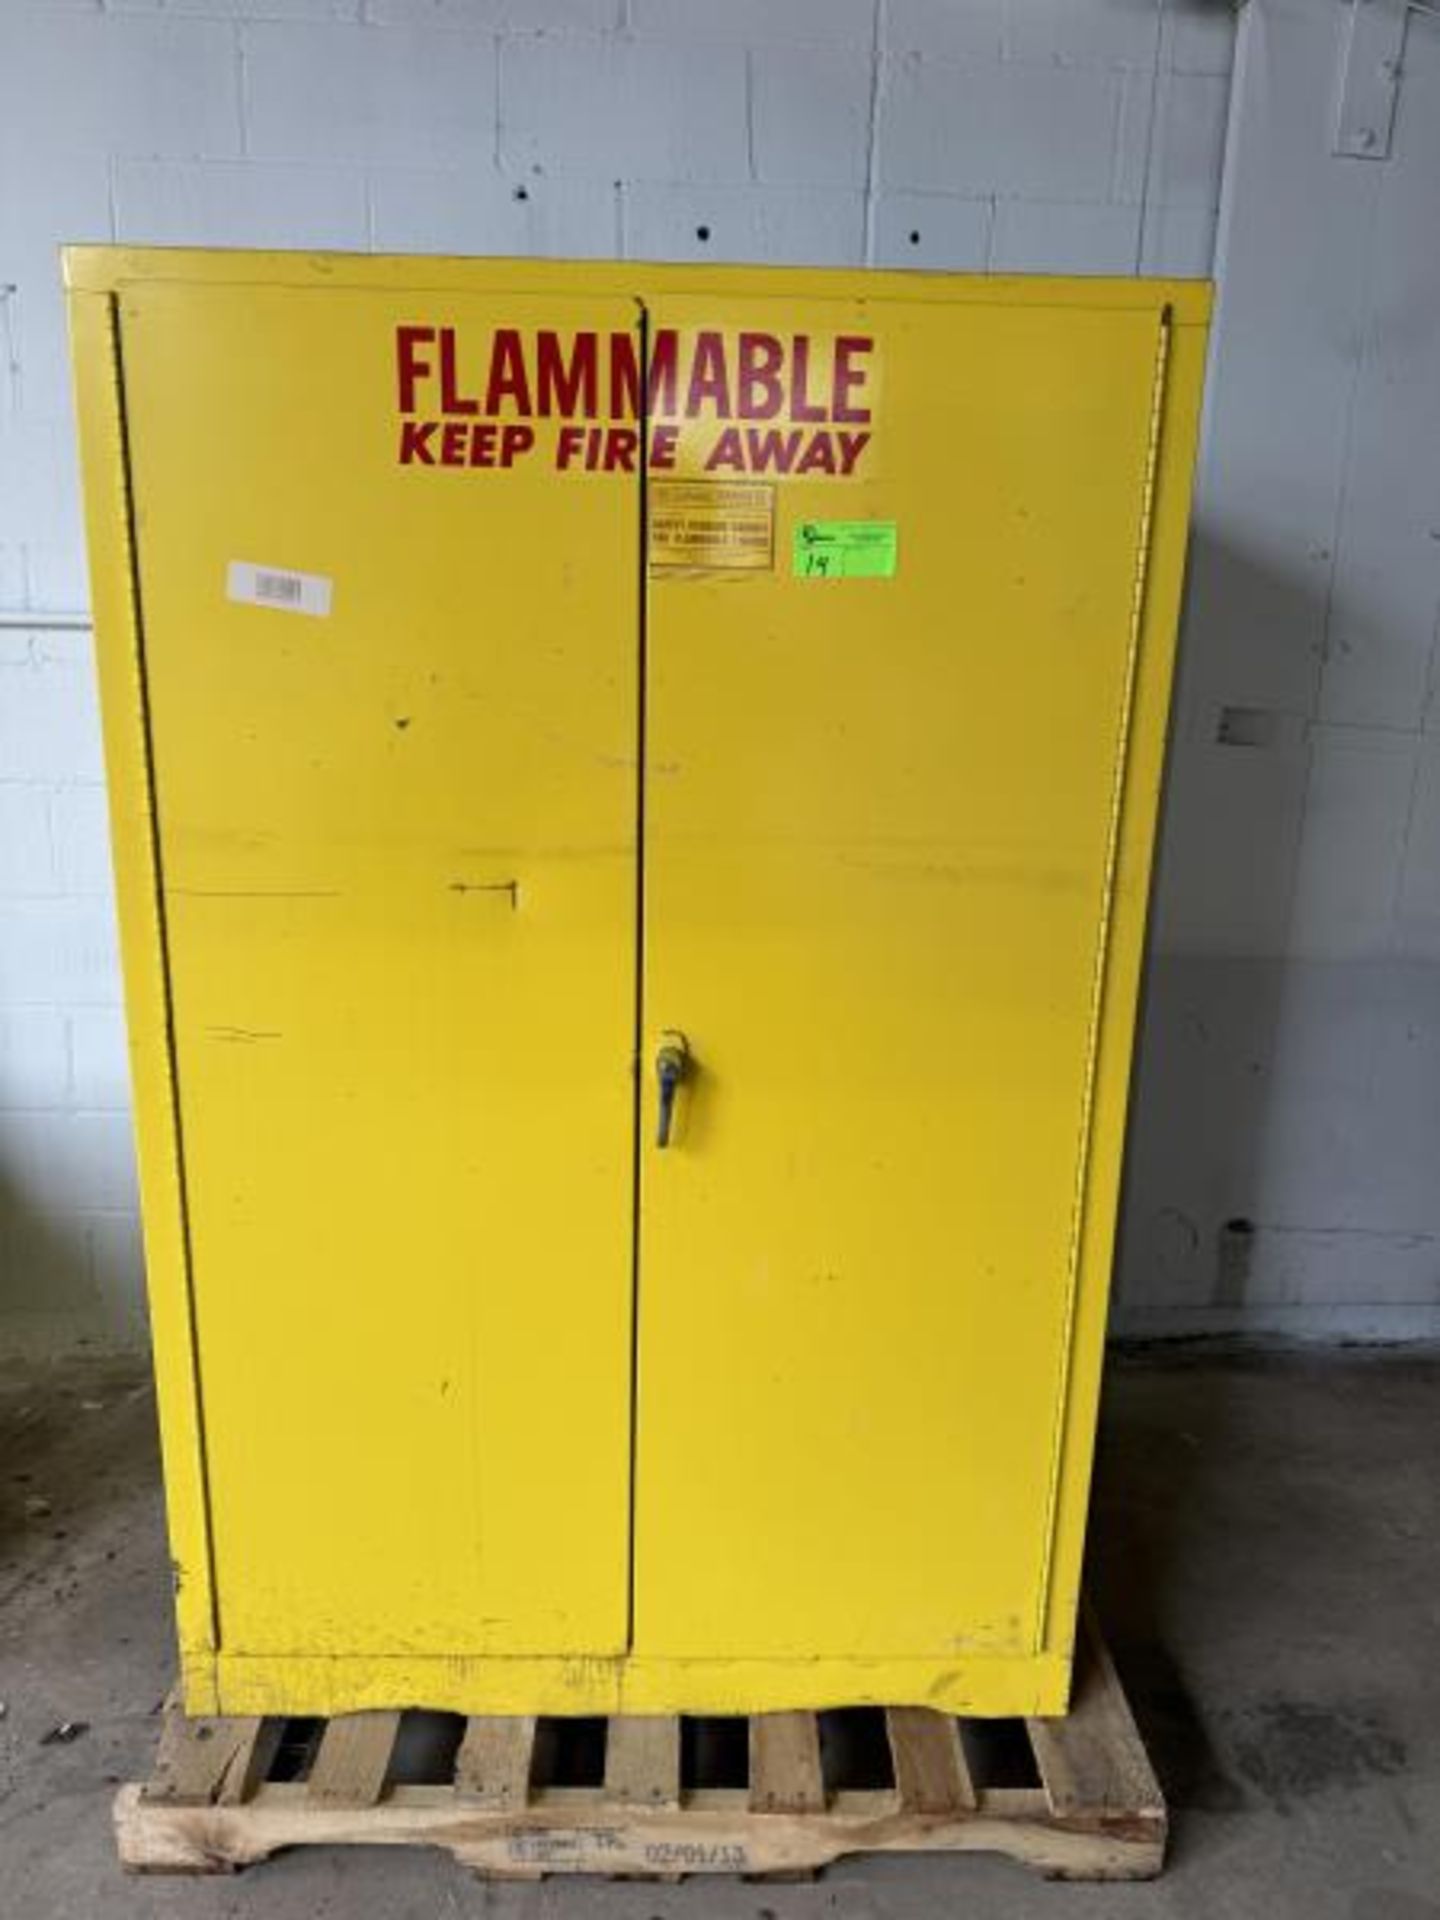 SE-CUR-AU Cabinet Safety Storage Cabinet Flammable Liquids 43" wide x 34" deep x 64" tall